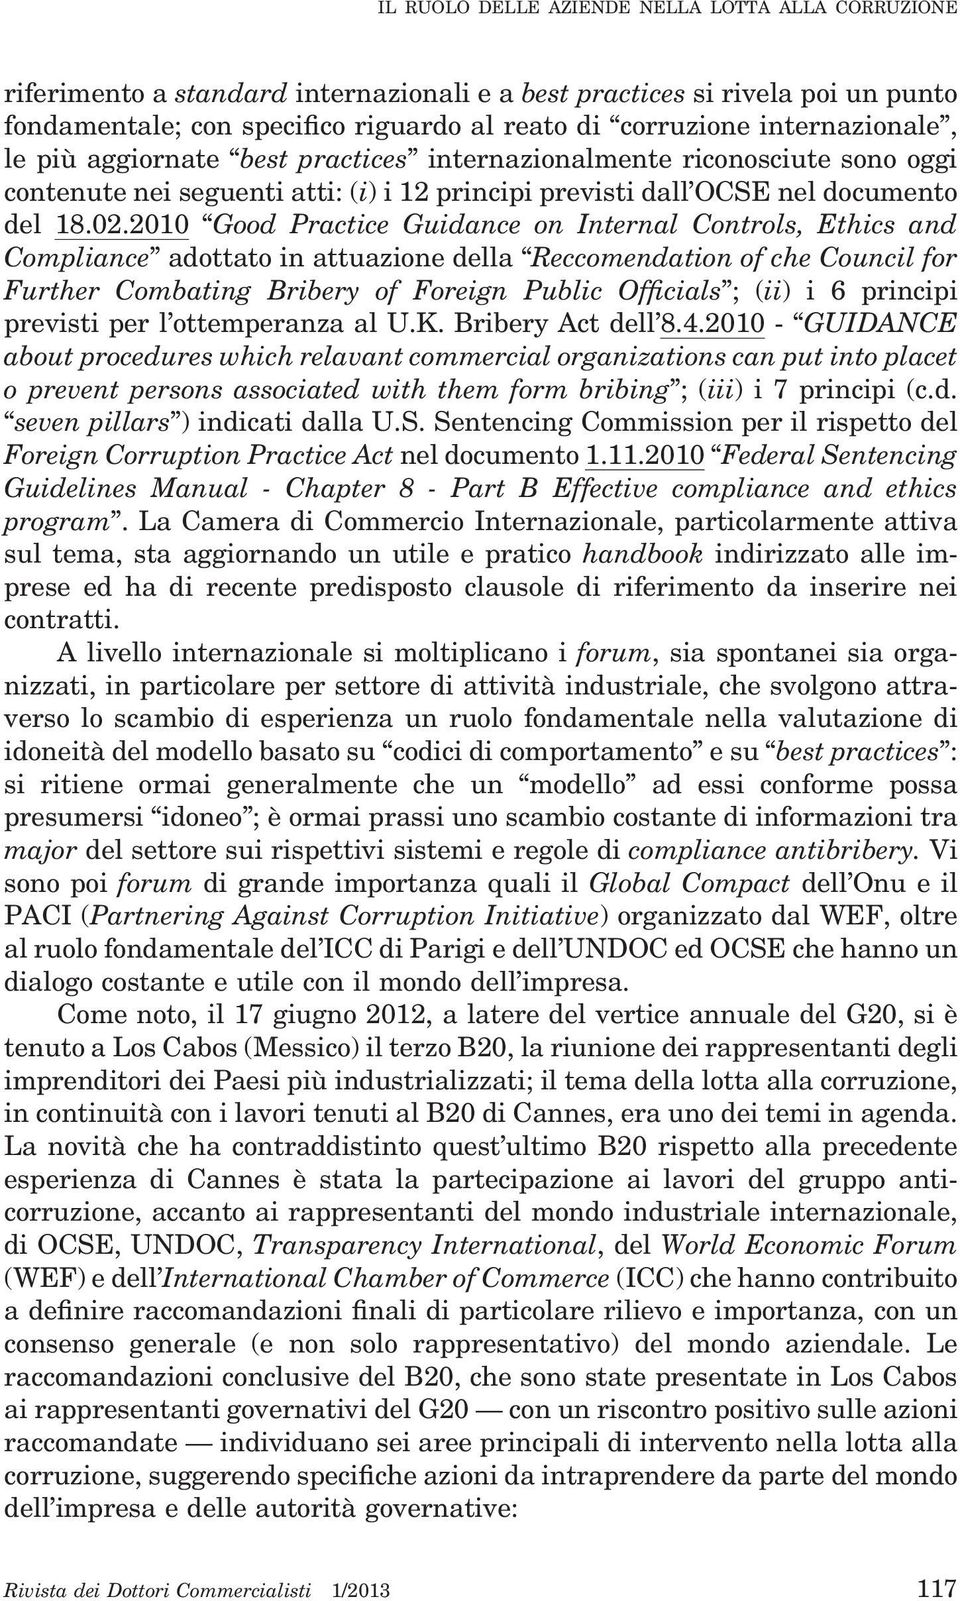 2010 Good Practice Guidance on Internal Controls, Ethics and Compliance adottato in attuazione della Reccomendation of che Council for Further Combating Bribery of Foreign Public Officials ; (ii) i 6